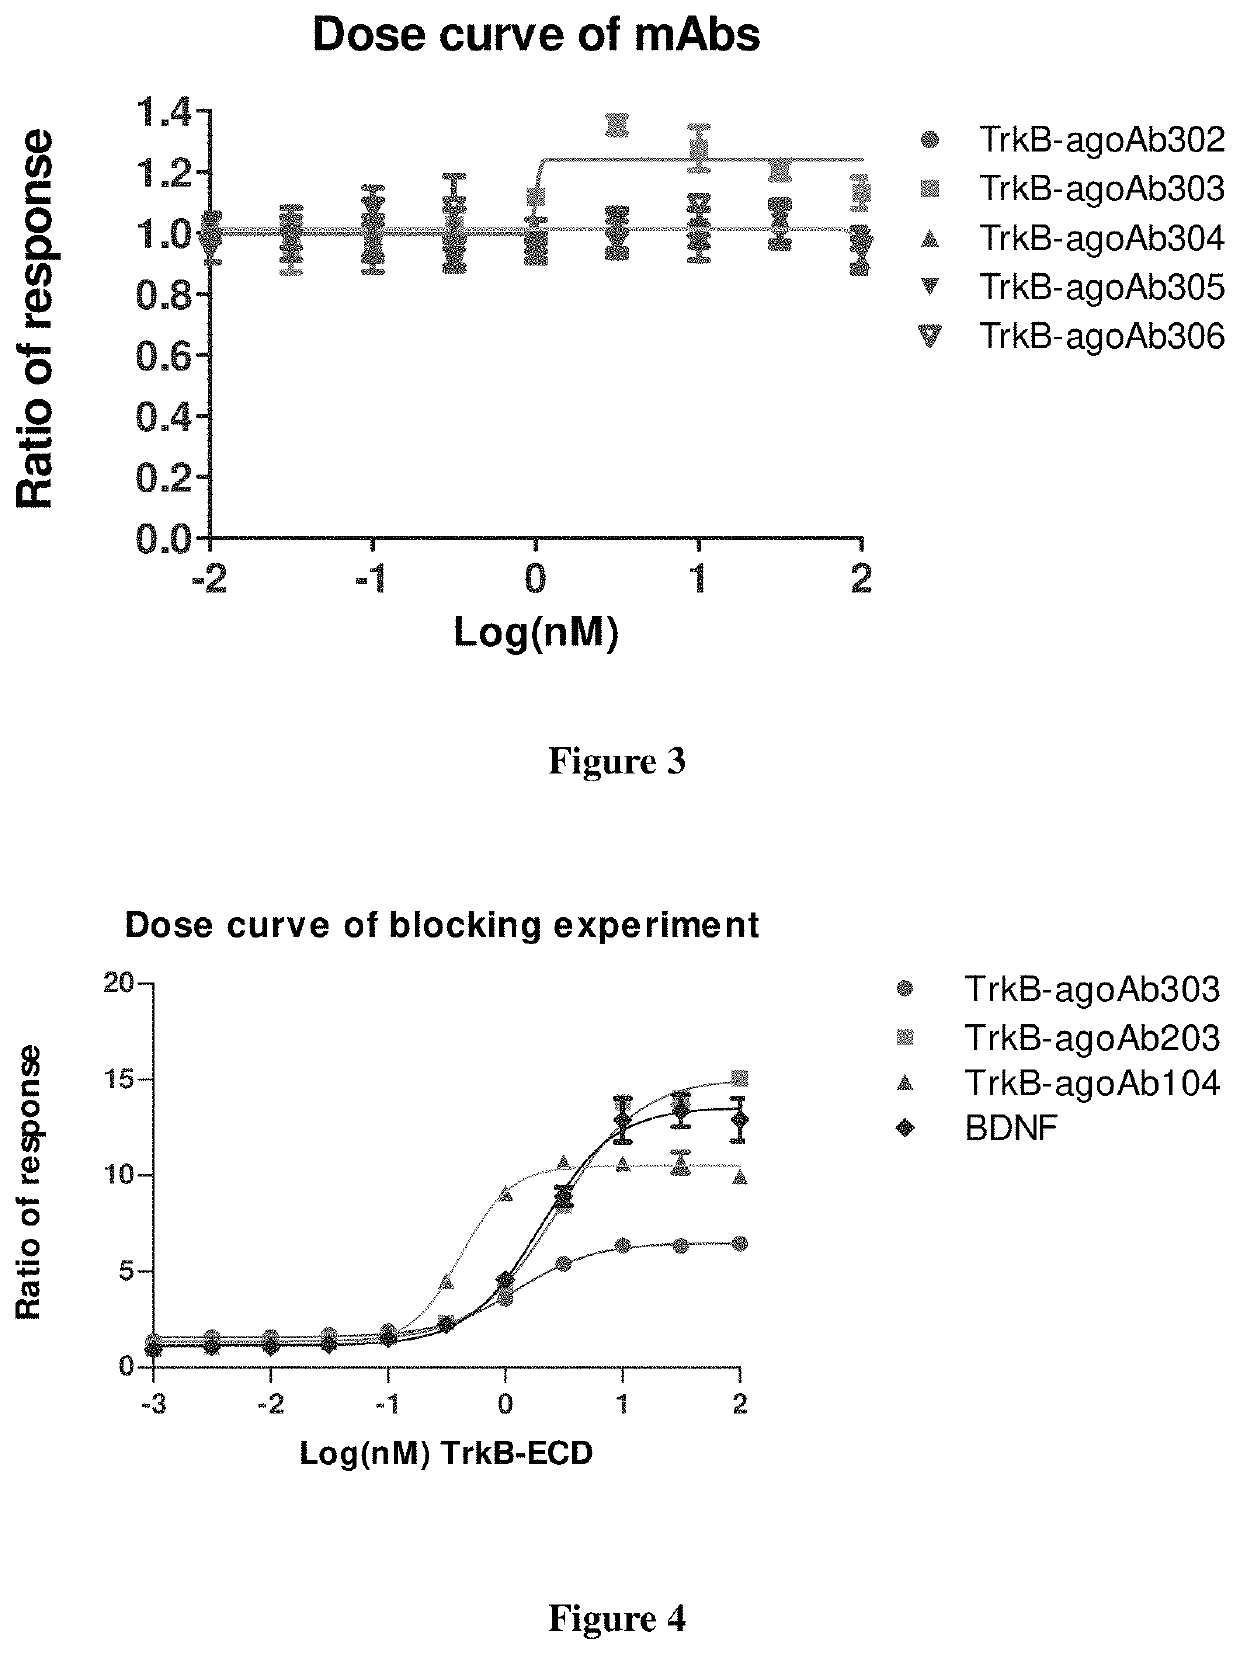 Anti-TrkB agonist antibodies binding to D5 domain of TrkB and methods of promoting neuronal survival in motor neuron injury, stroke or glaucoma